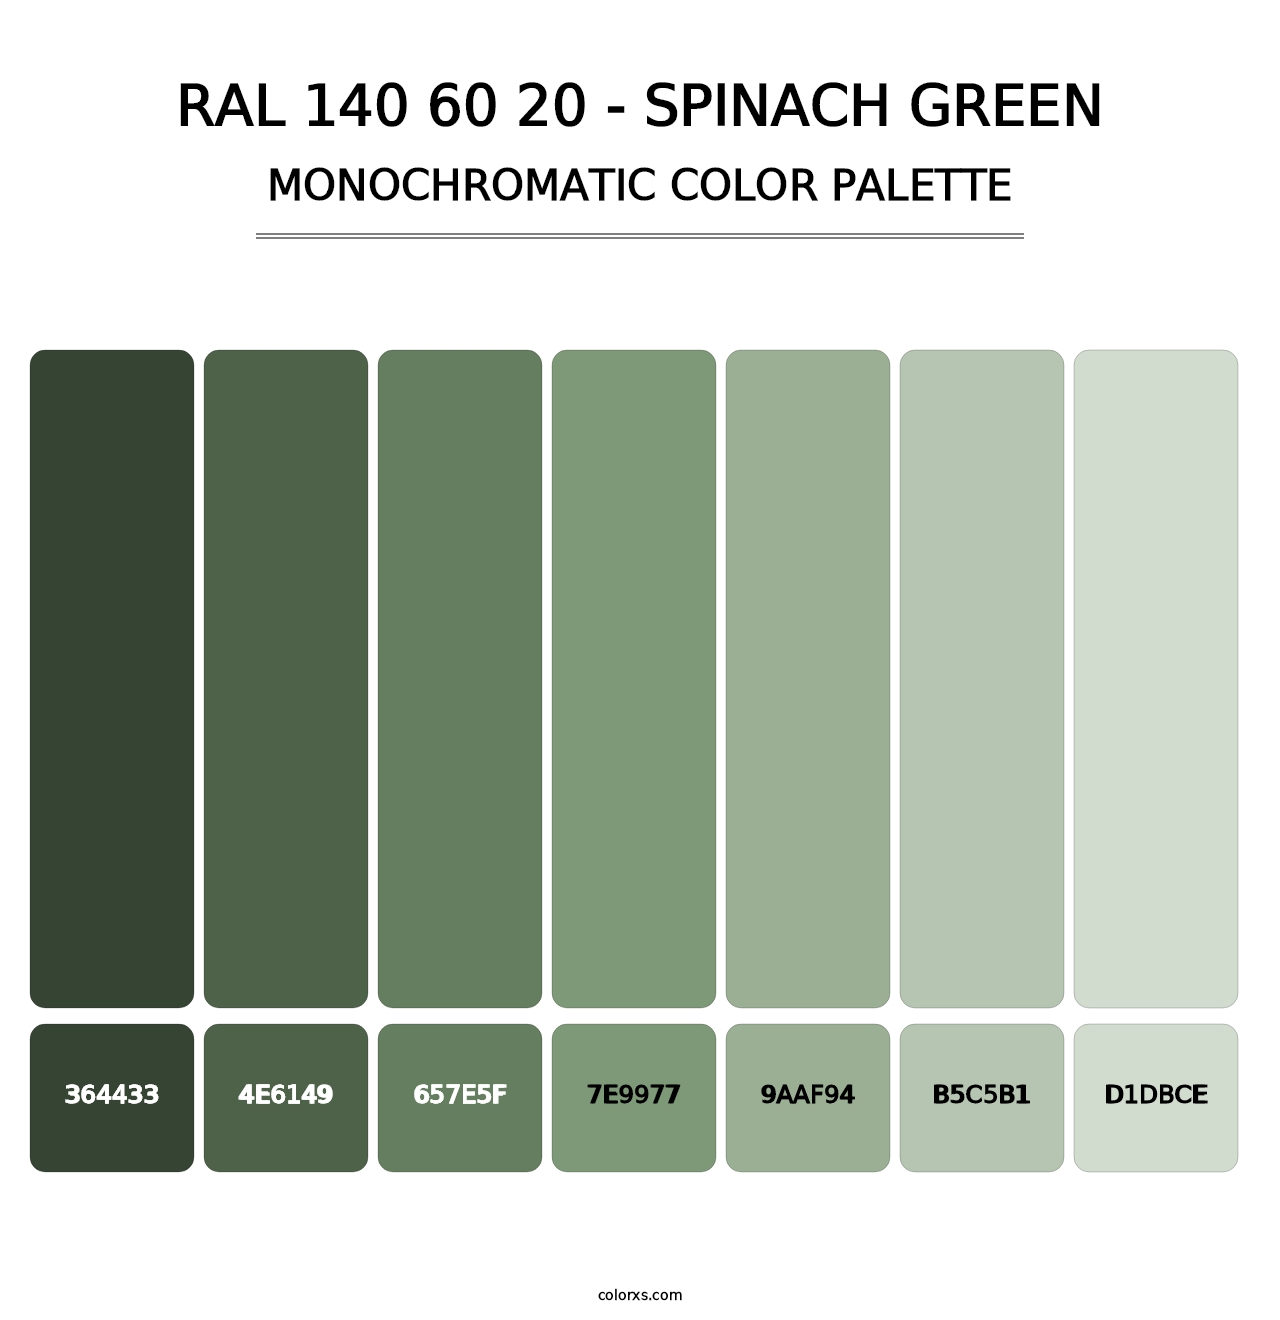 RAL 140 60 20 - Spinach Green - Monochromatic Color Palette